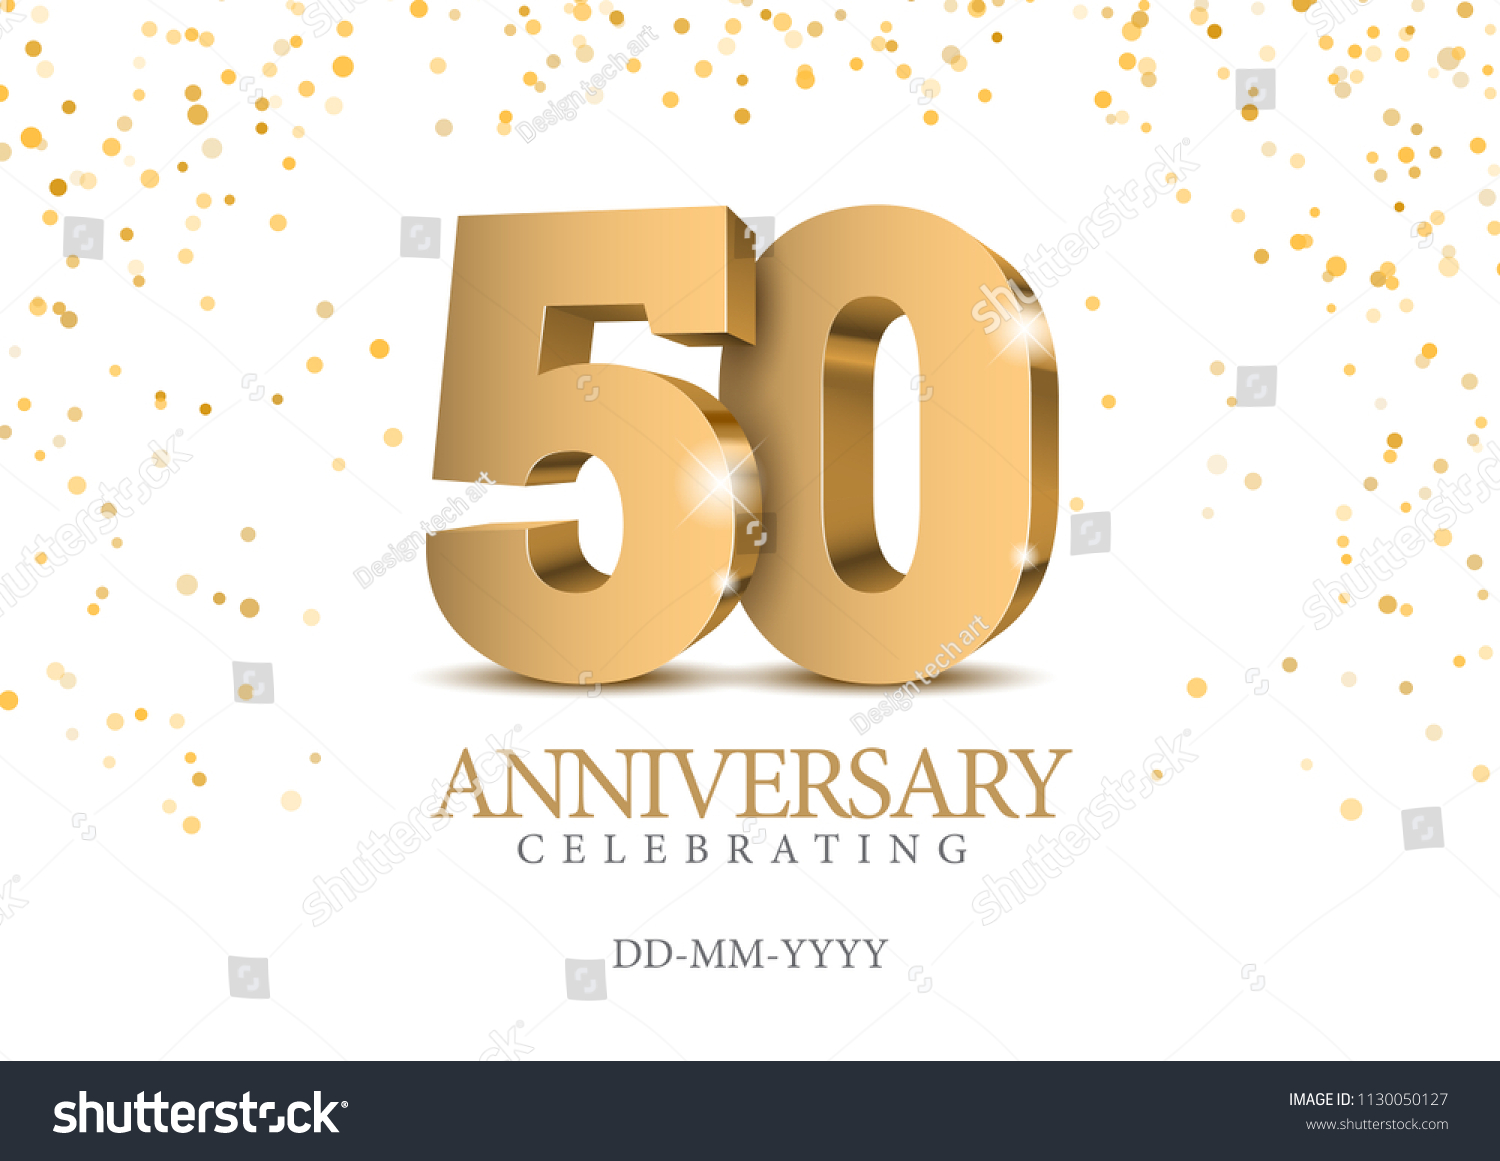 SVG of Anniversary 50. gold 3d numbers. Poster template for Celebrating 50th anniversary event party. Vector illustration svg